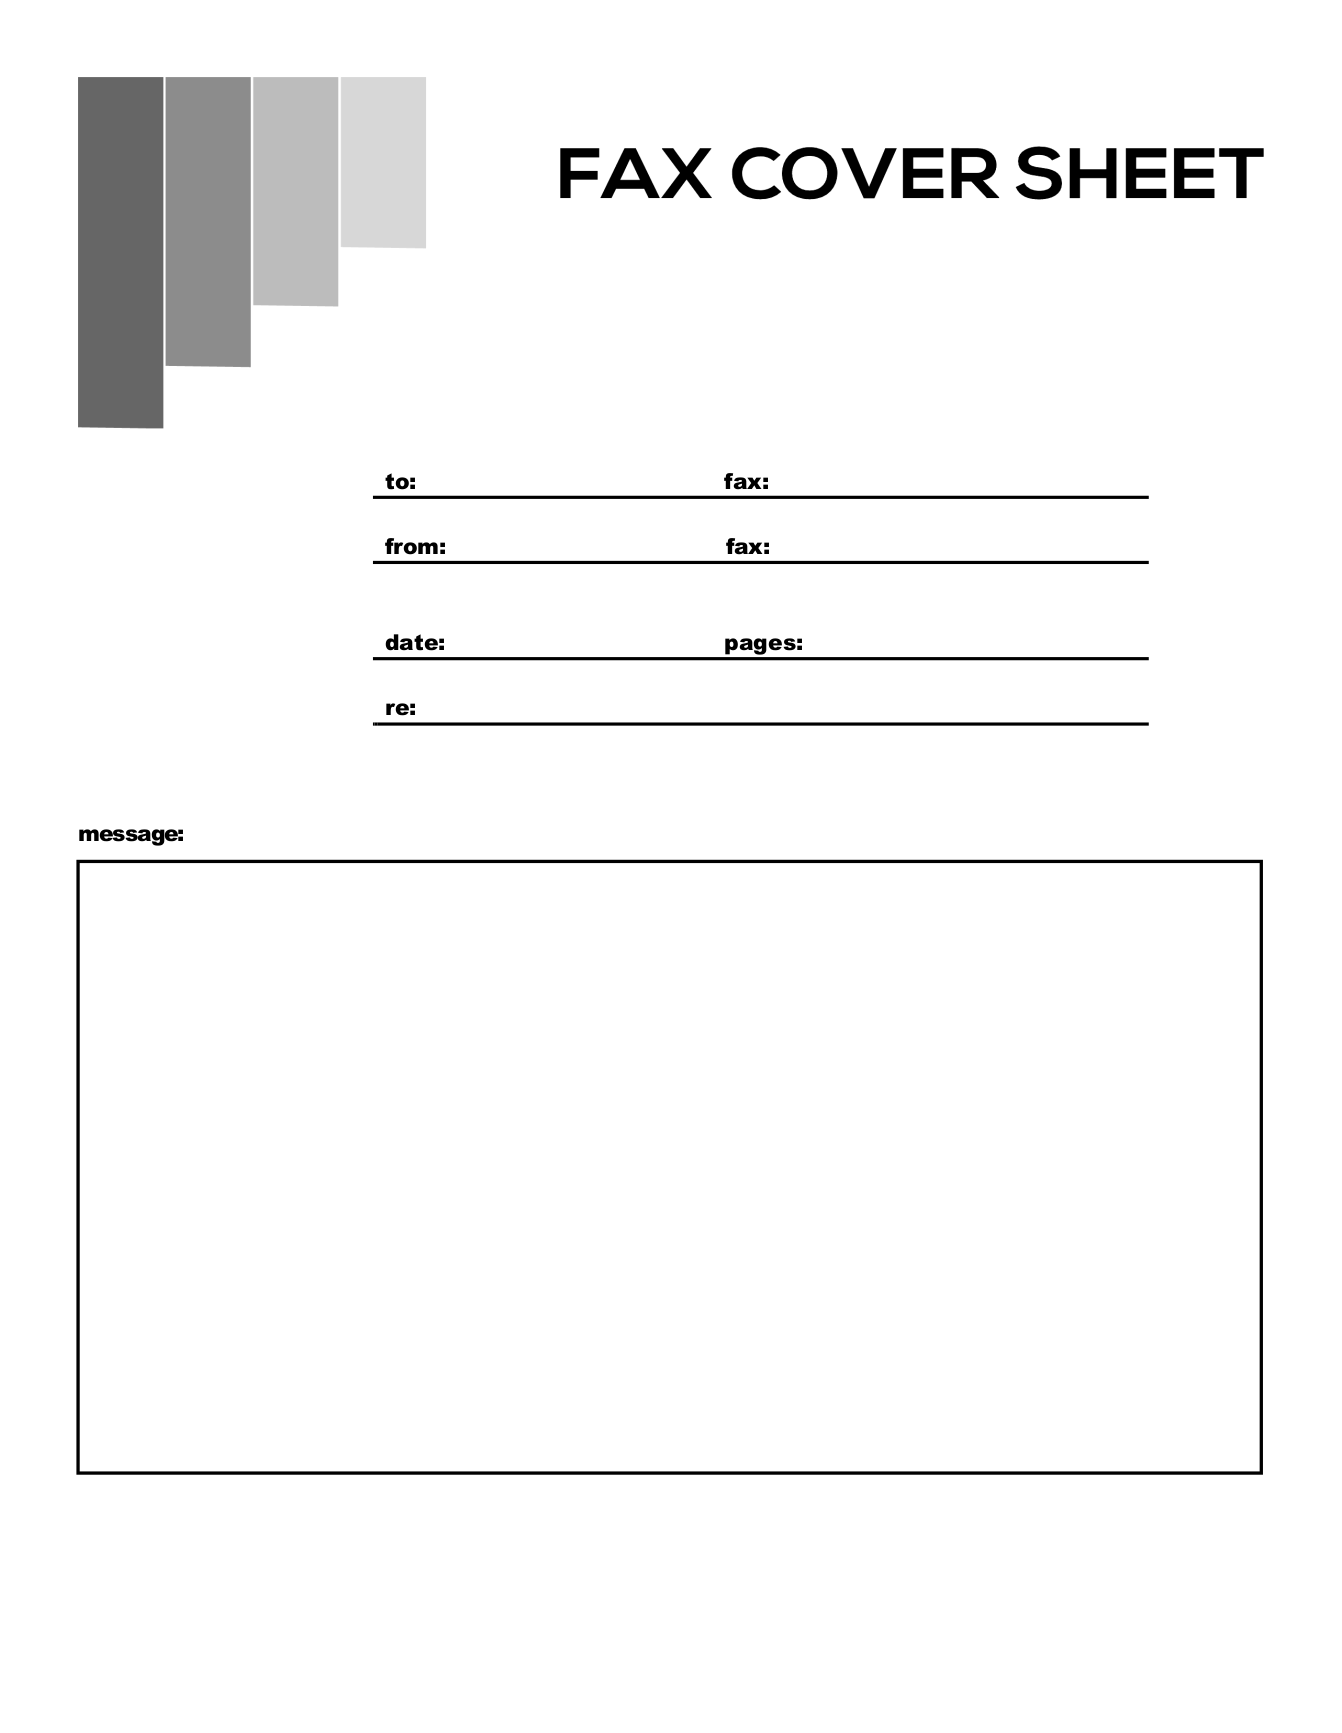 free fax cover sheets faxburner